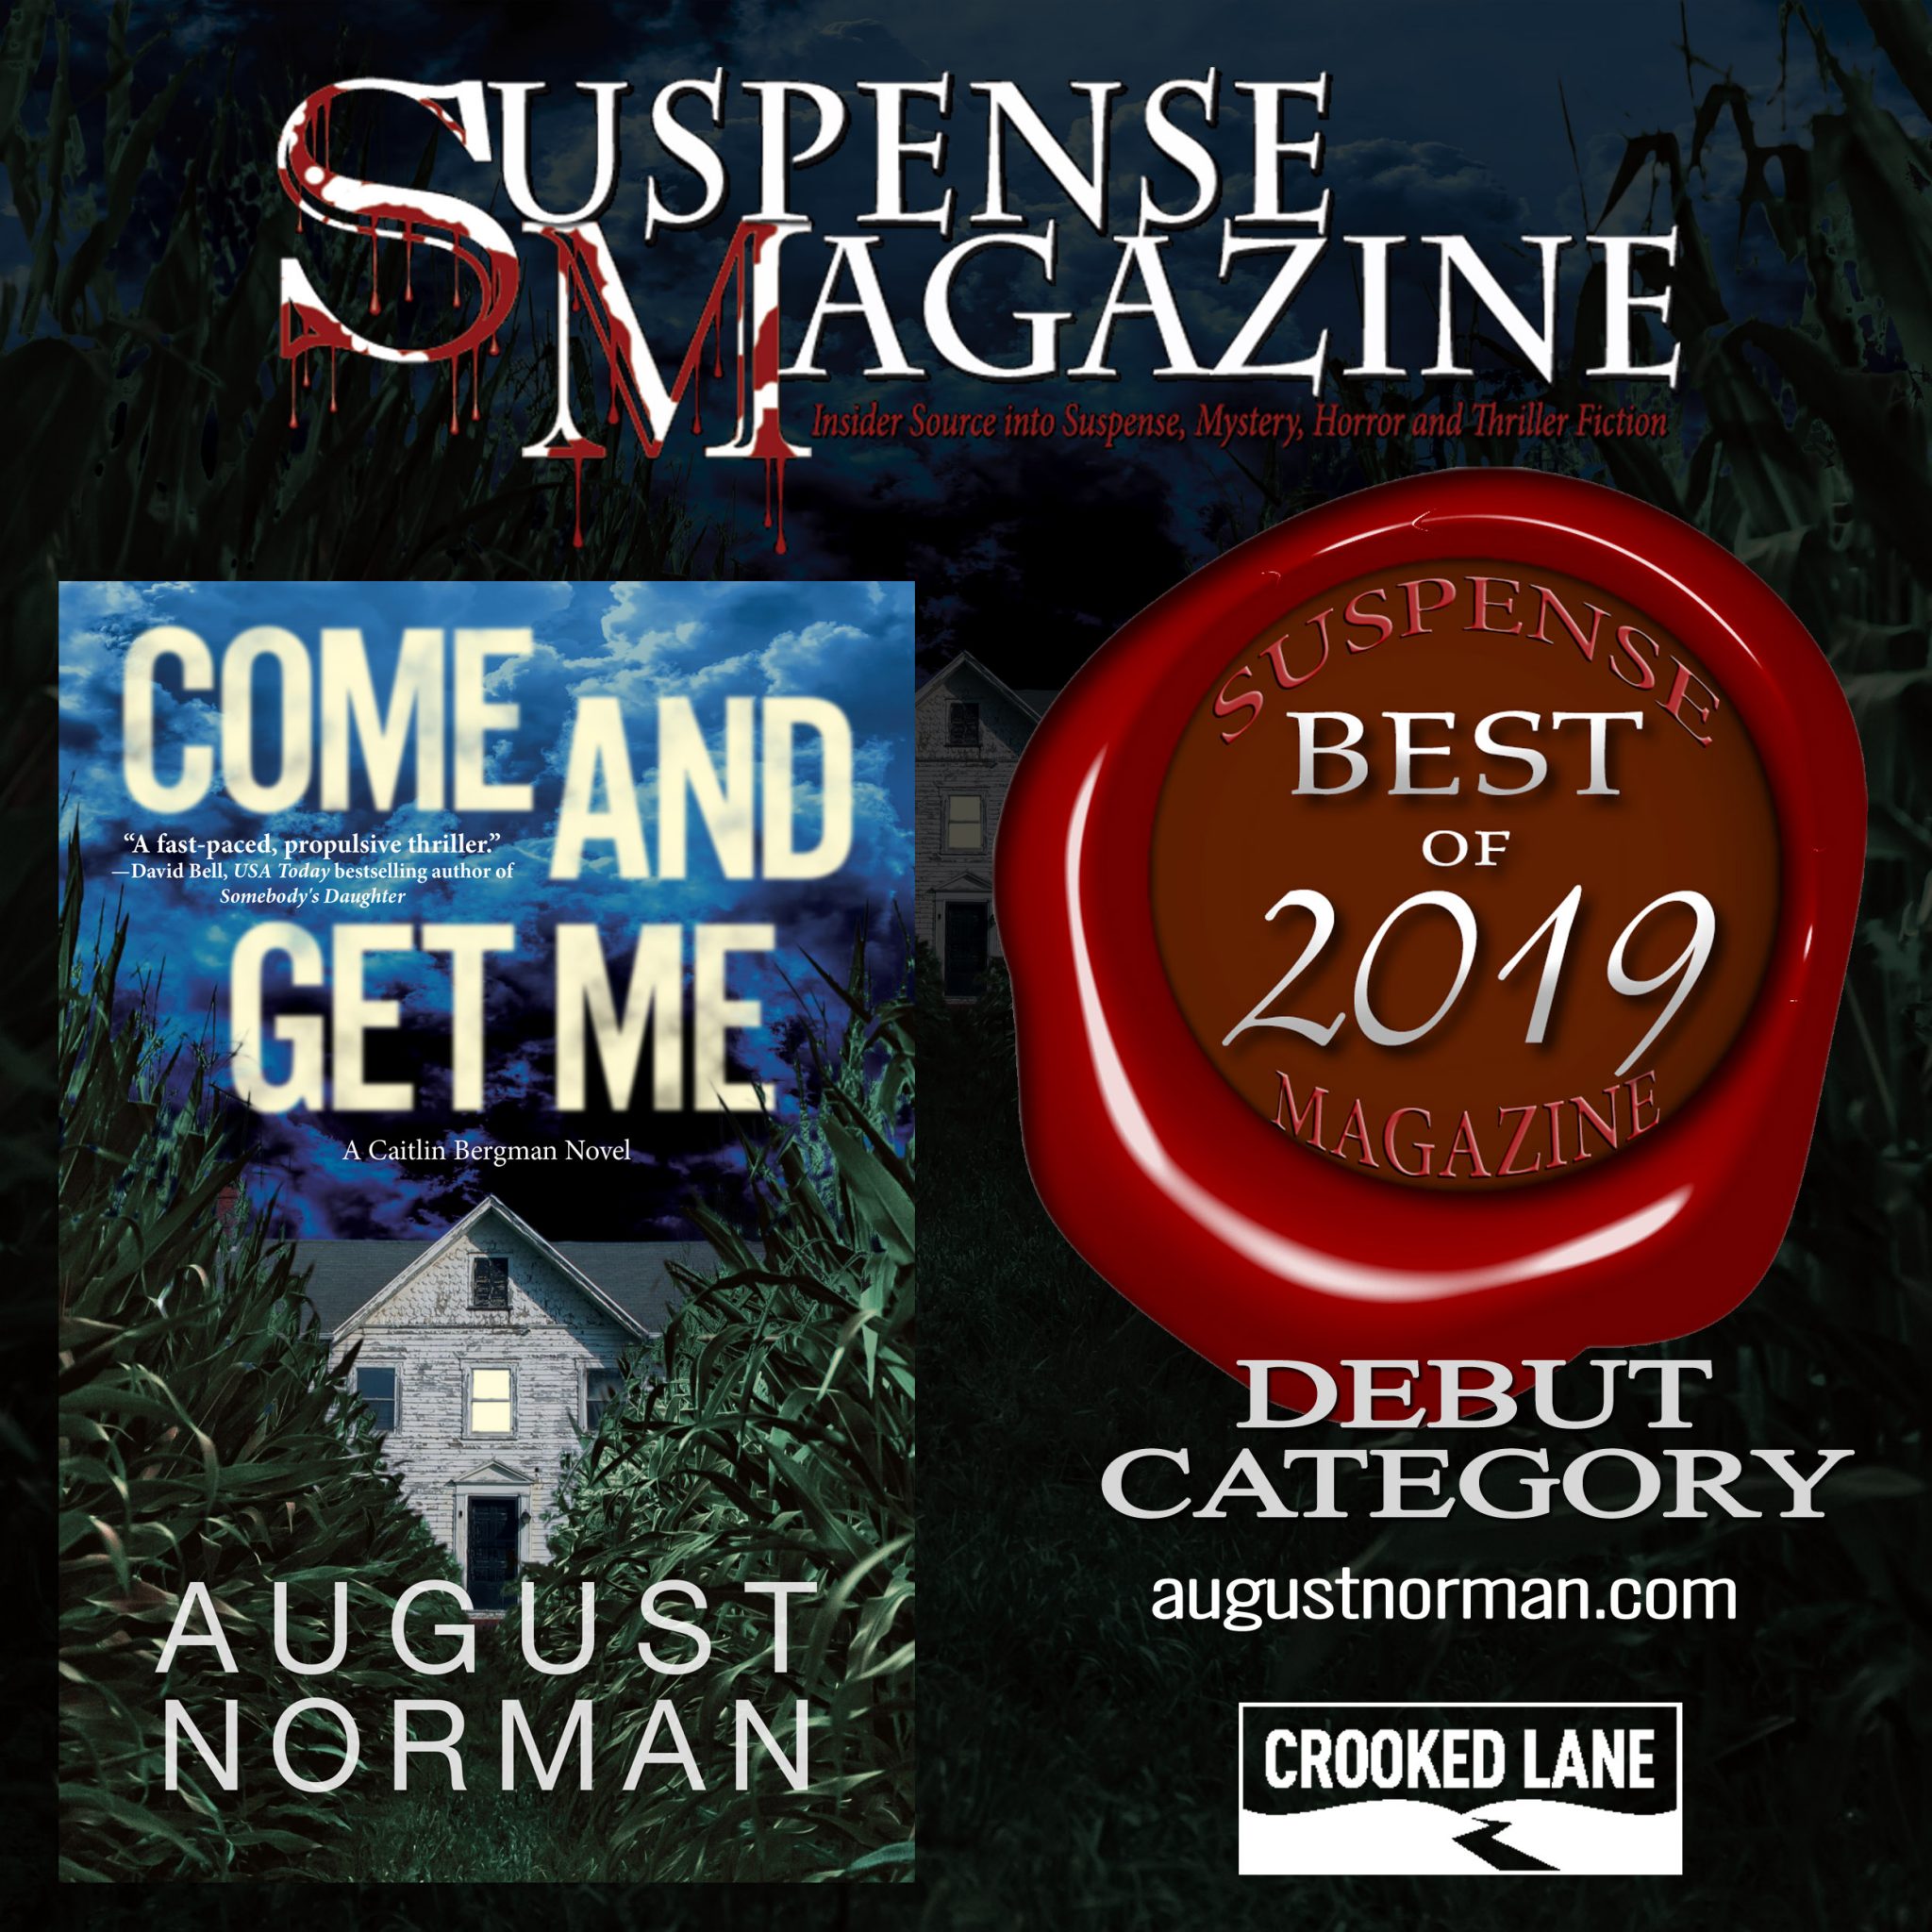 Read more about the article Suspense Magazine names Come and Get Me by August Norman in Best of 2019 Issue Debut Category